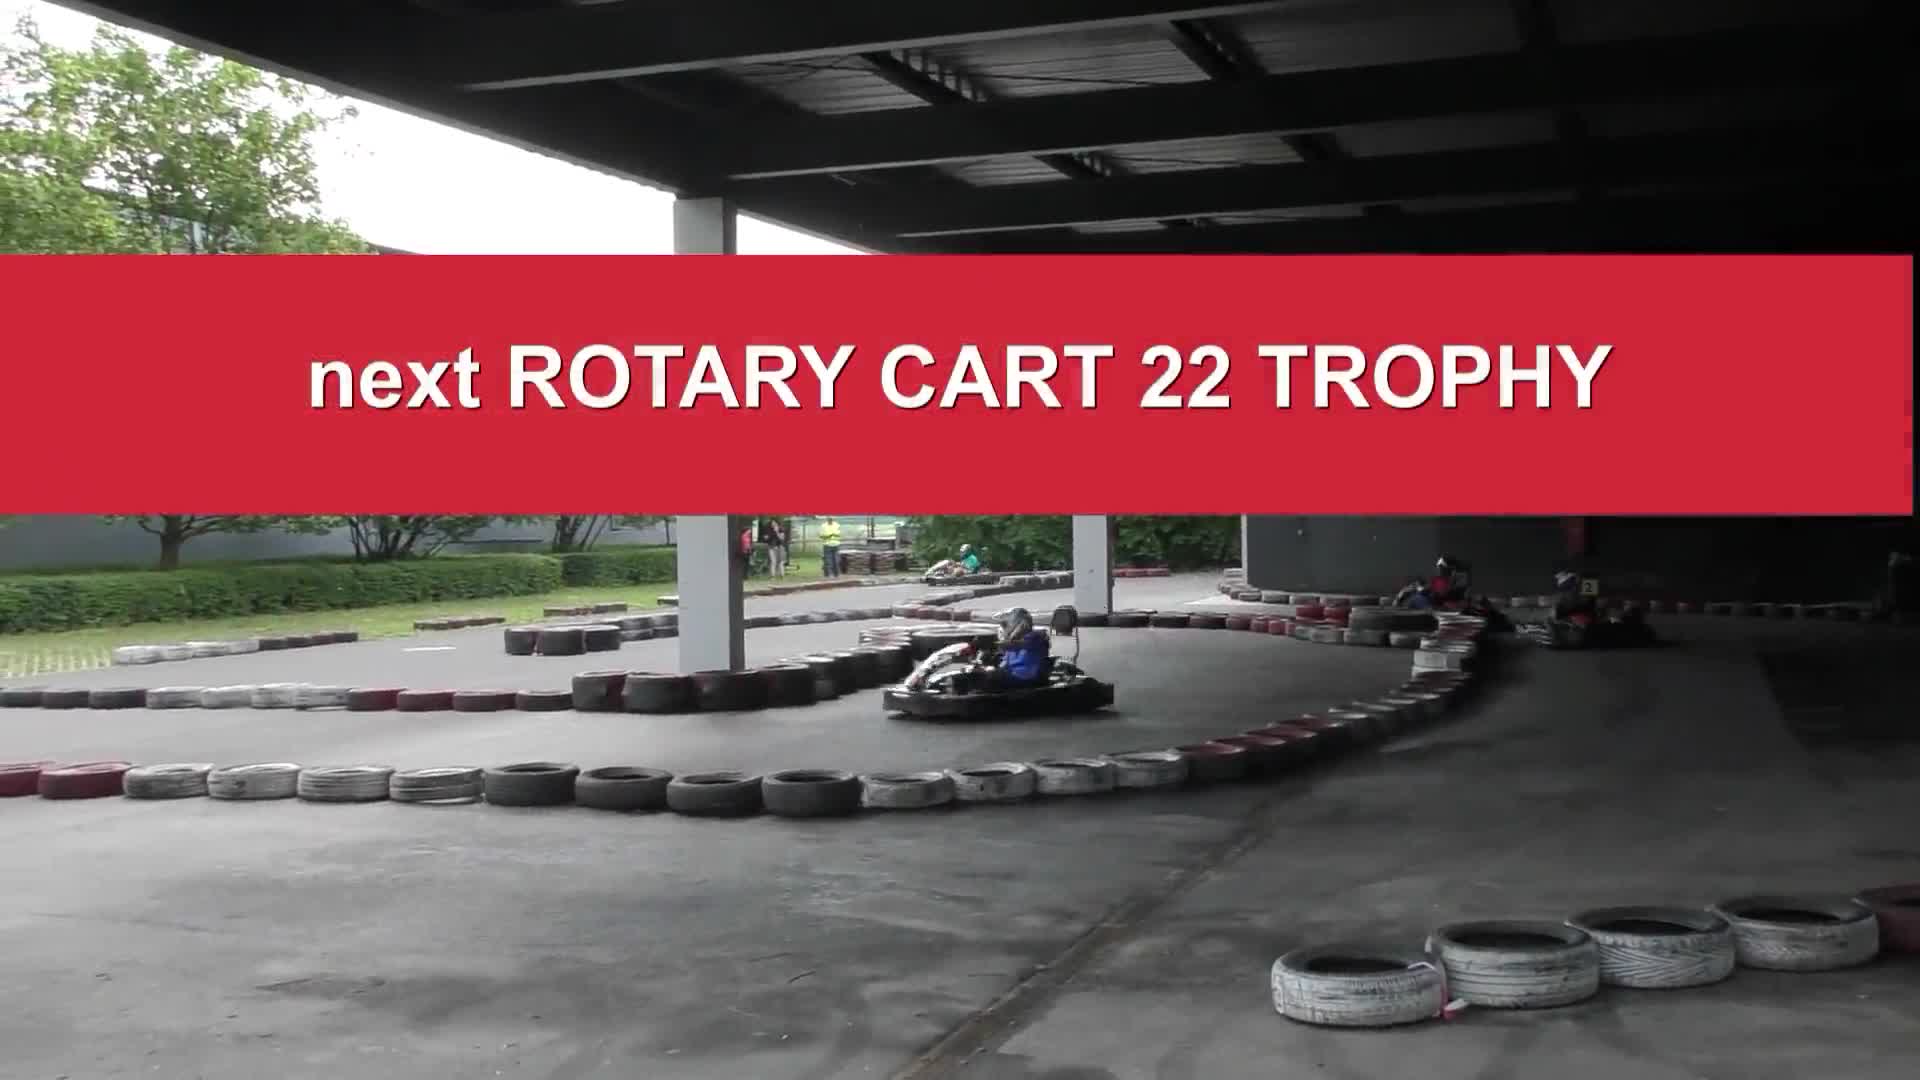 next ROTARY CART 22 TROPHY